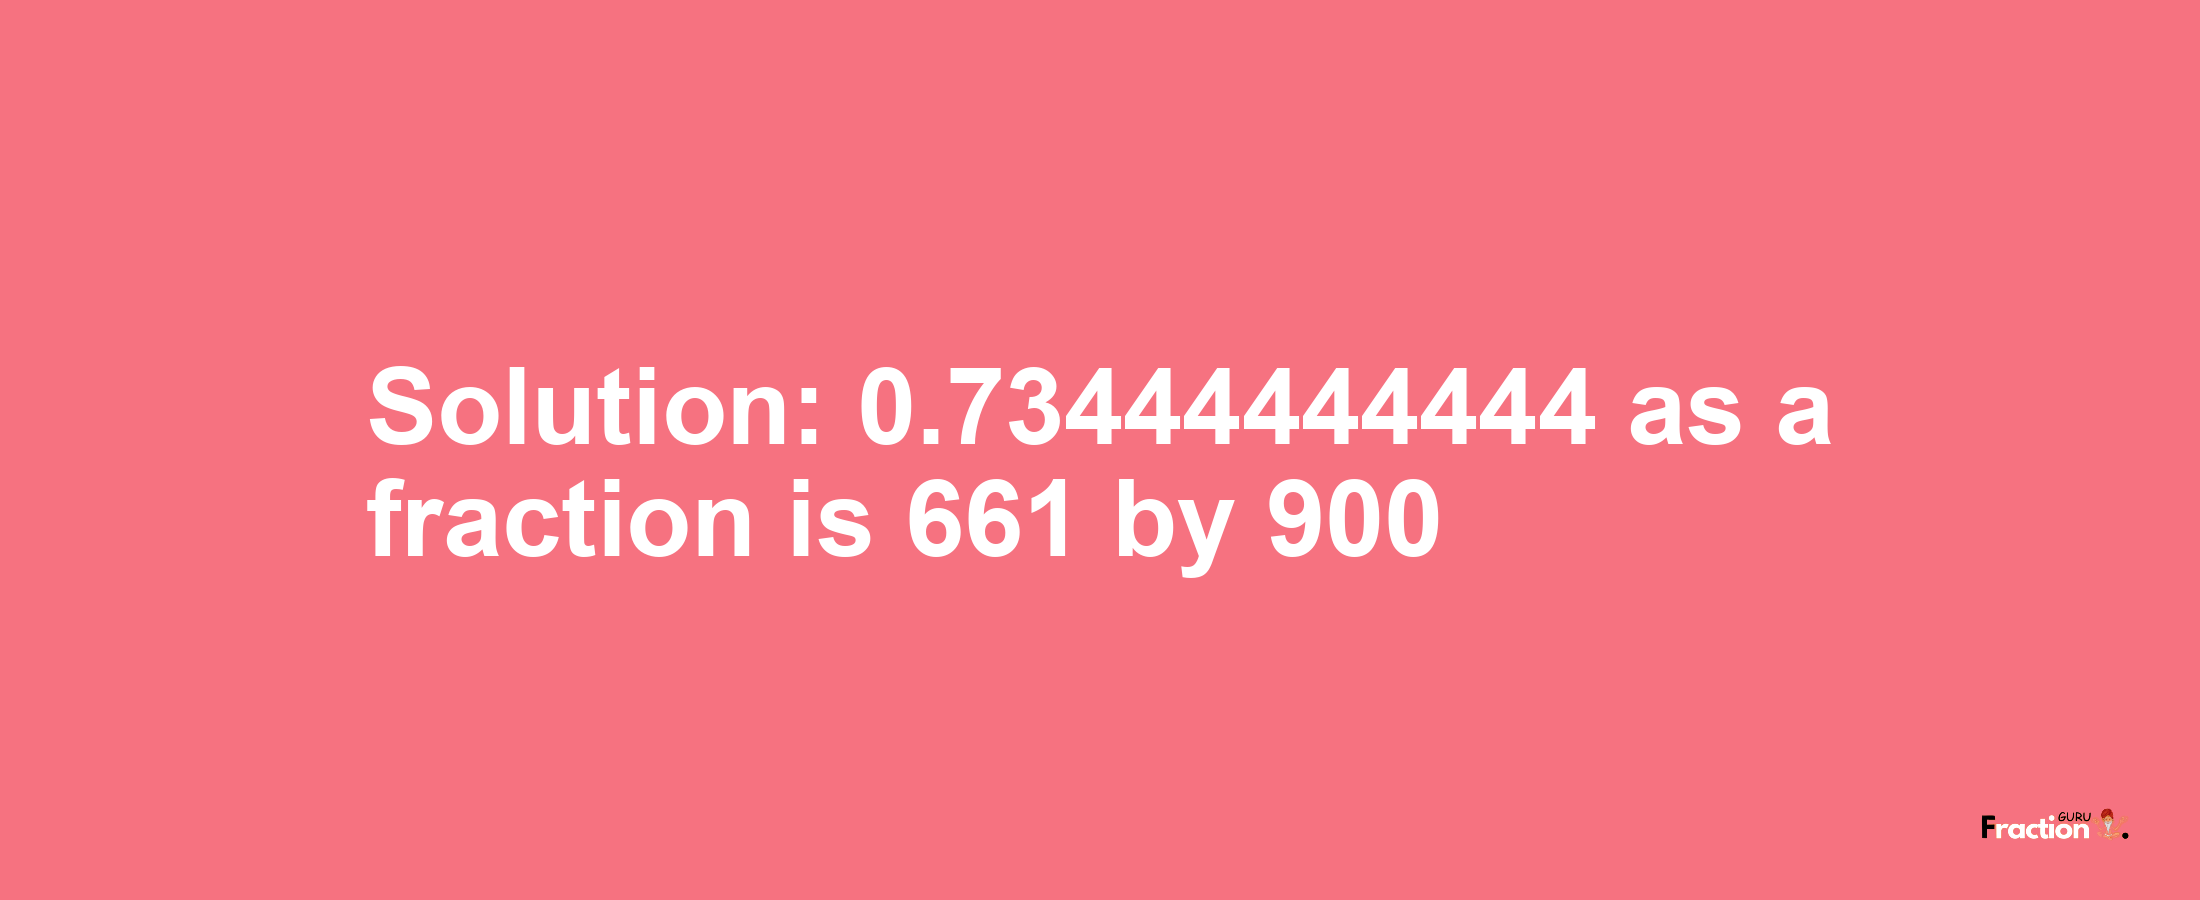 Solution:0.73444444444 as a fraction is 661/900